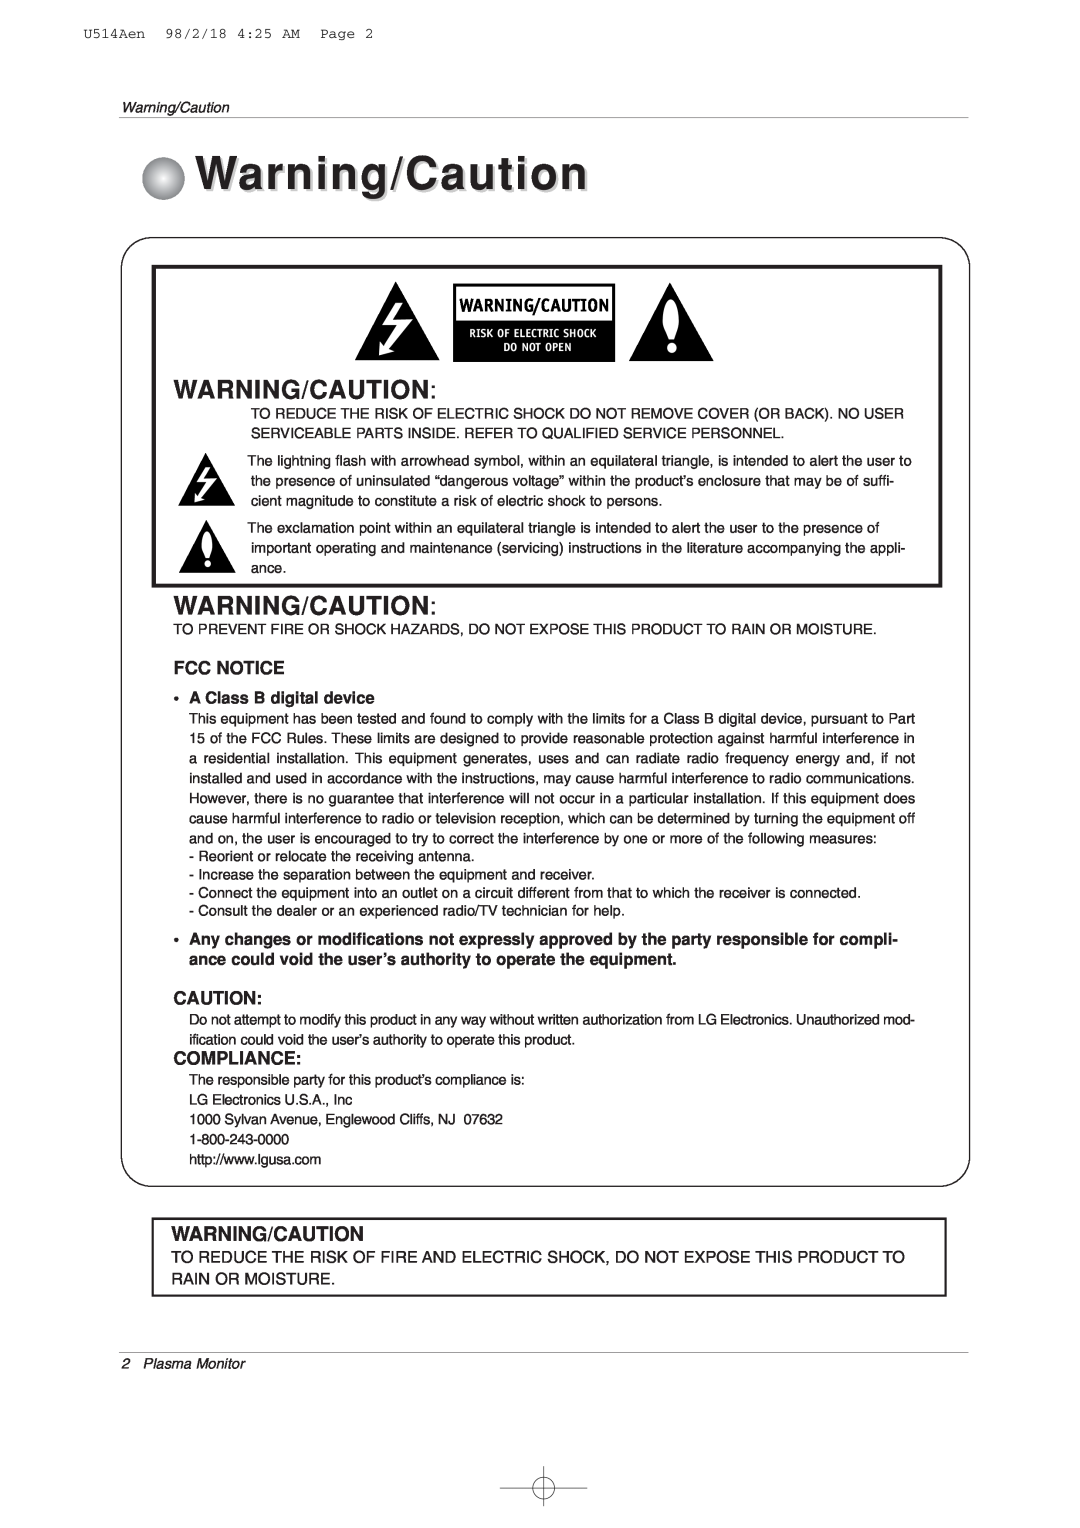 LG Electronics 42PM1M owner manual Warning/Caution, Fcc Notice, Compliance, A Class B digital device 